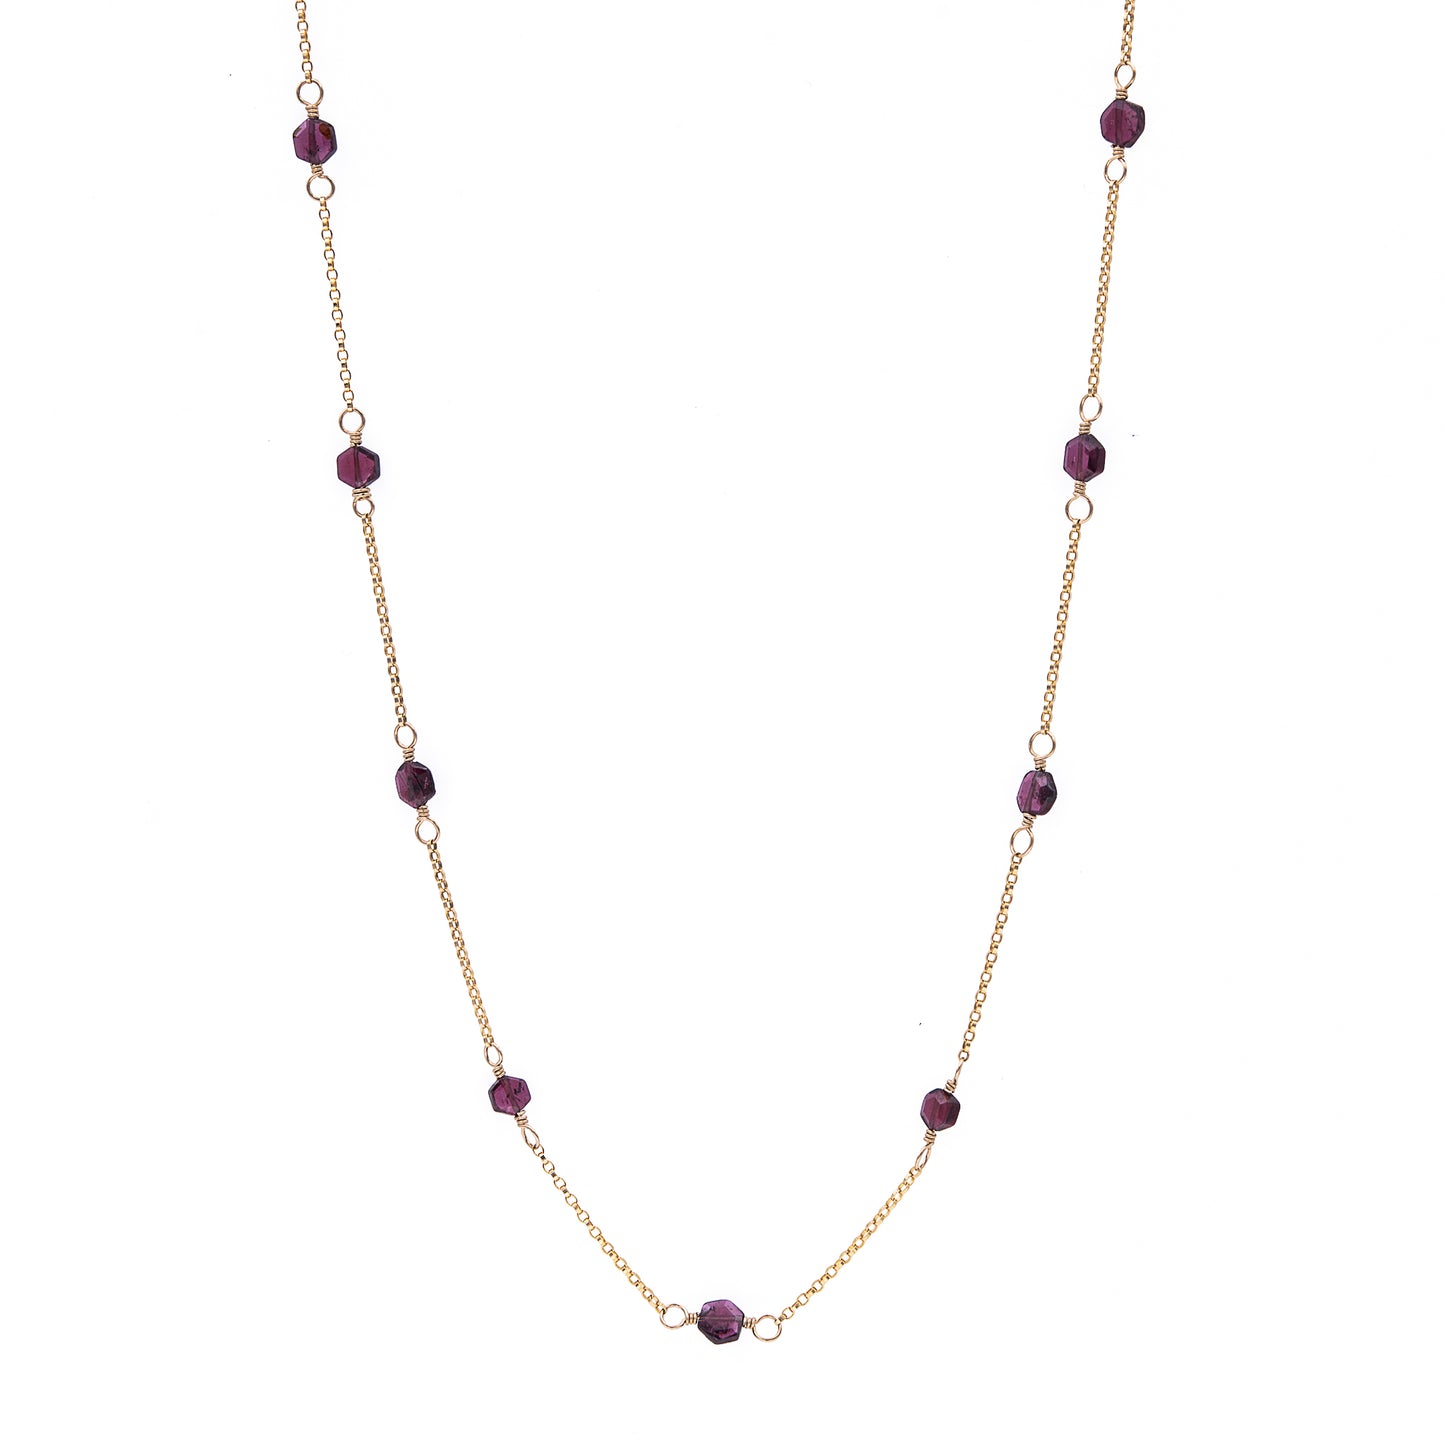 Zurina Ketola Handmade Beaded Gemstone Necklace Featuring Upcycled Garnet Hexagon Beads with 14K Gold Fill Details.  